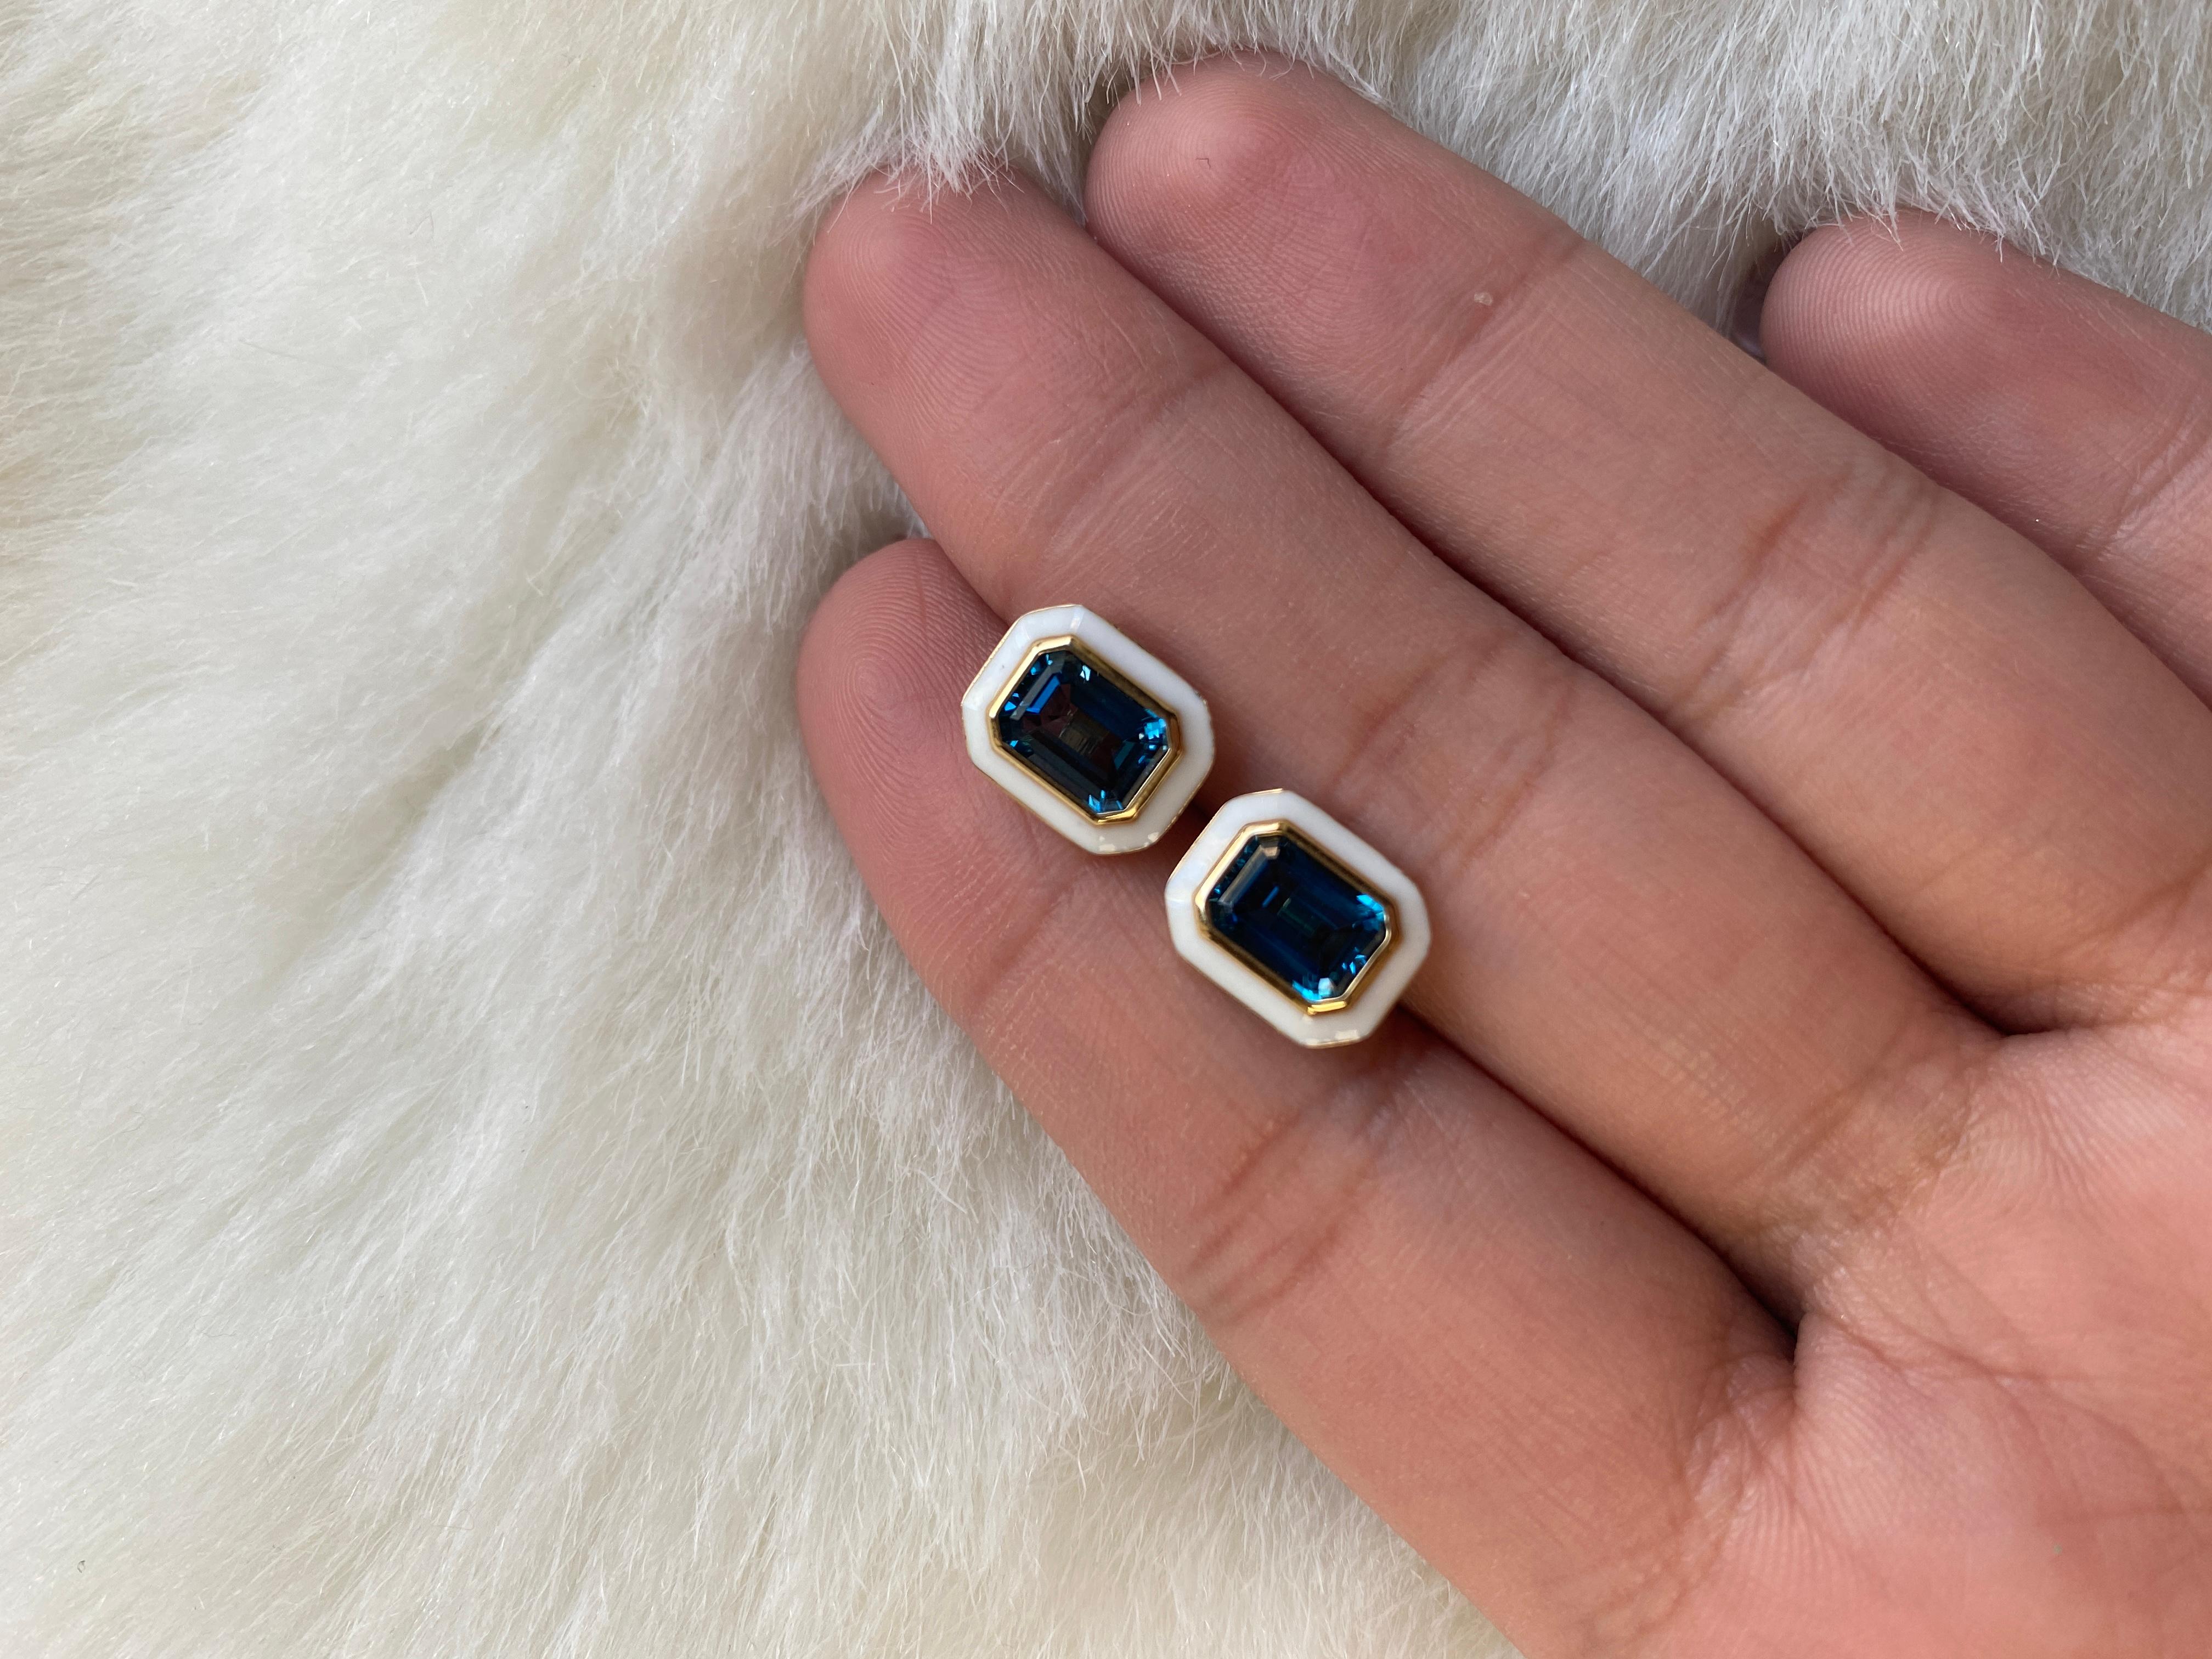 Goshwara London Blue Topaz Emerald Cut Studs with White Enamel Earrings In New Condition For Sale In New York, NY